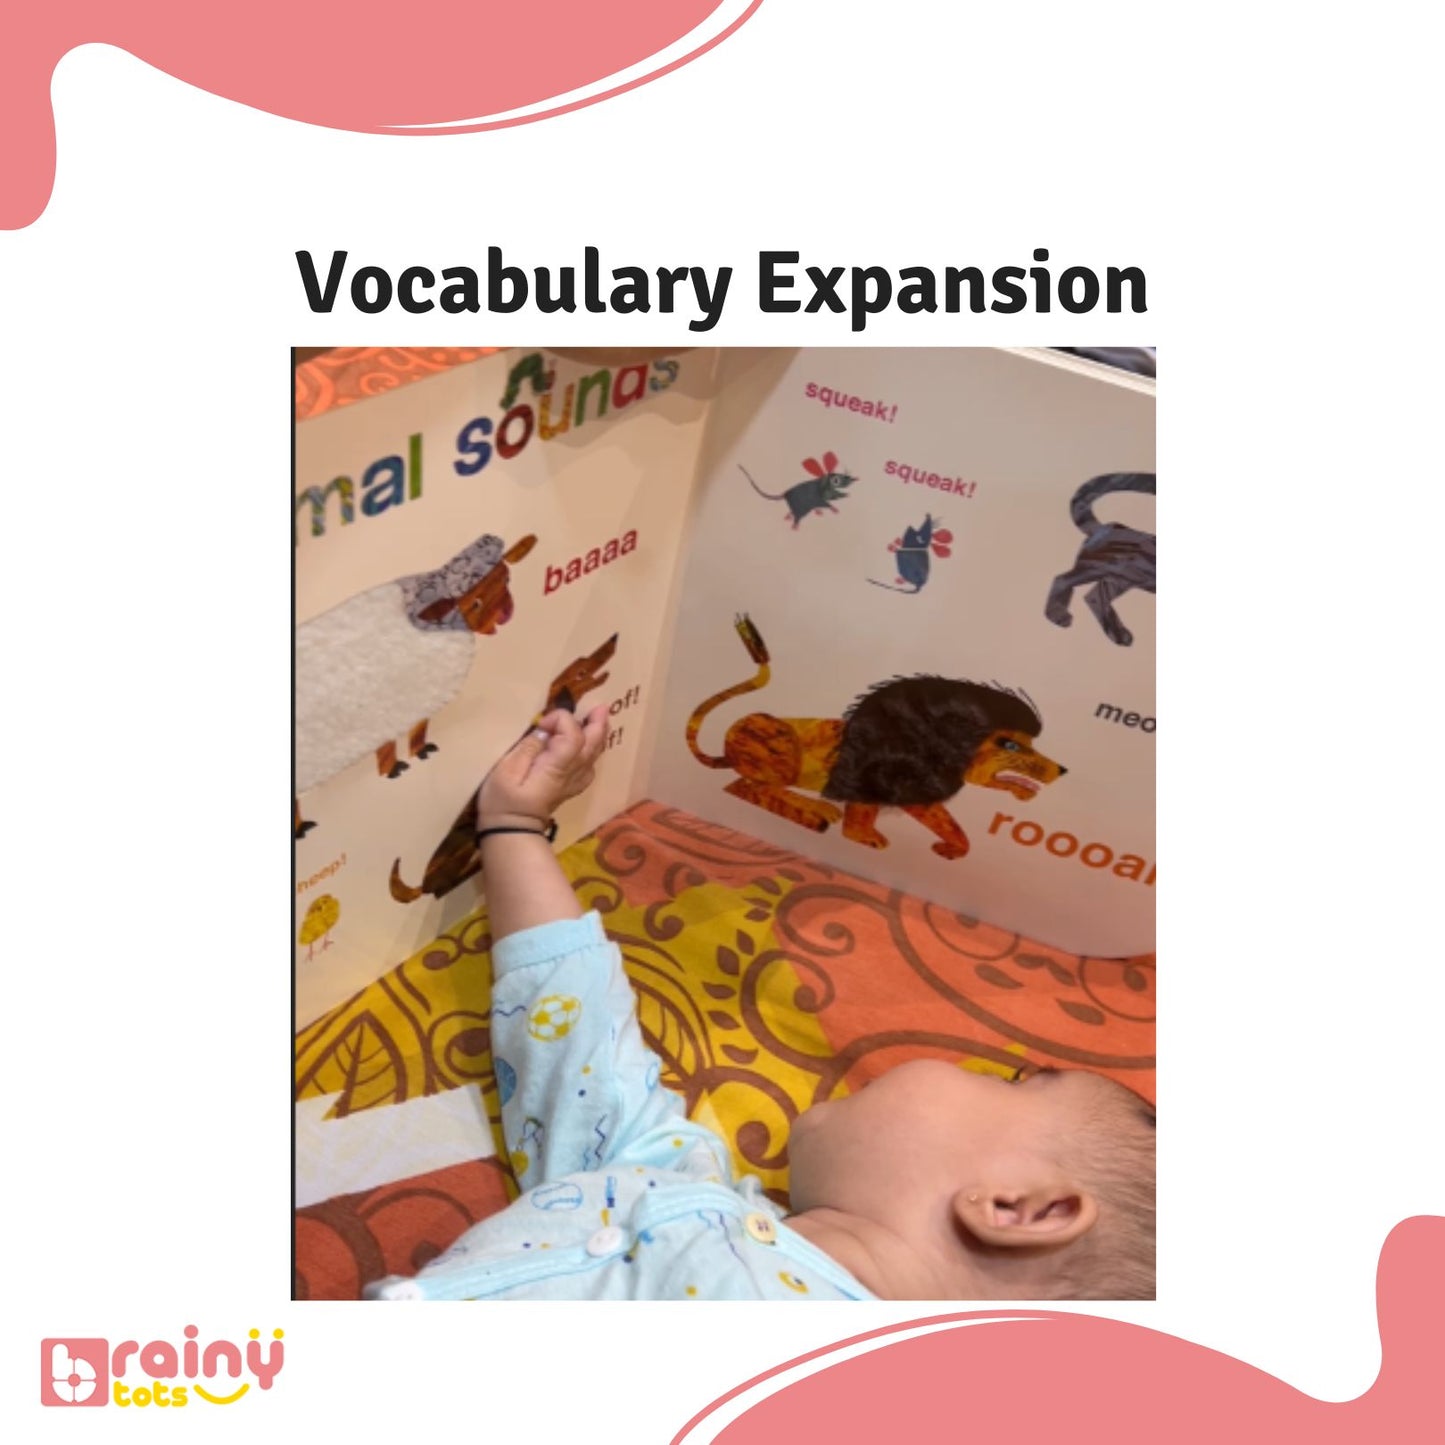 Expand vocabulary through sensory exploration with our Touch and Feel Playbook. Featuring interactive textures and engaging content, this tactile learning tool offers a dynamic way for young readers to learn new words while stimulating their senses, fostering language development and literacy skills.